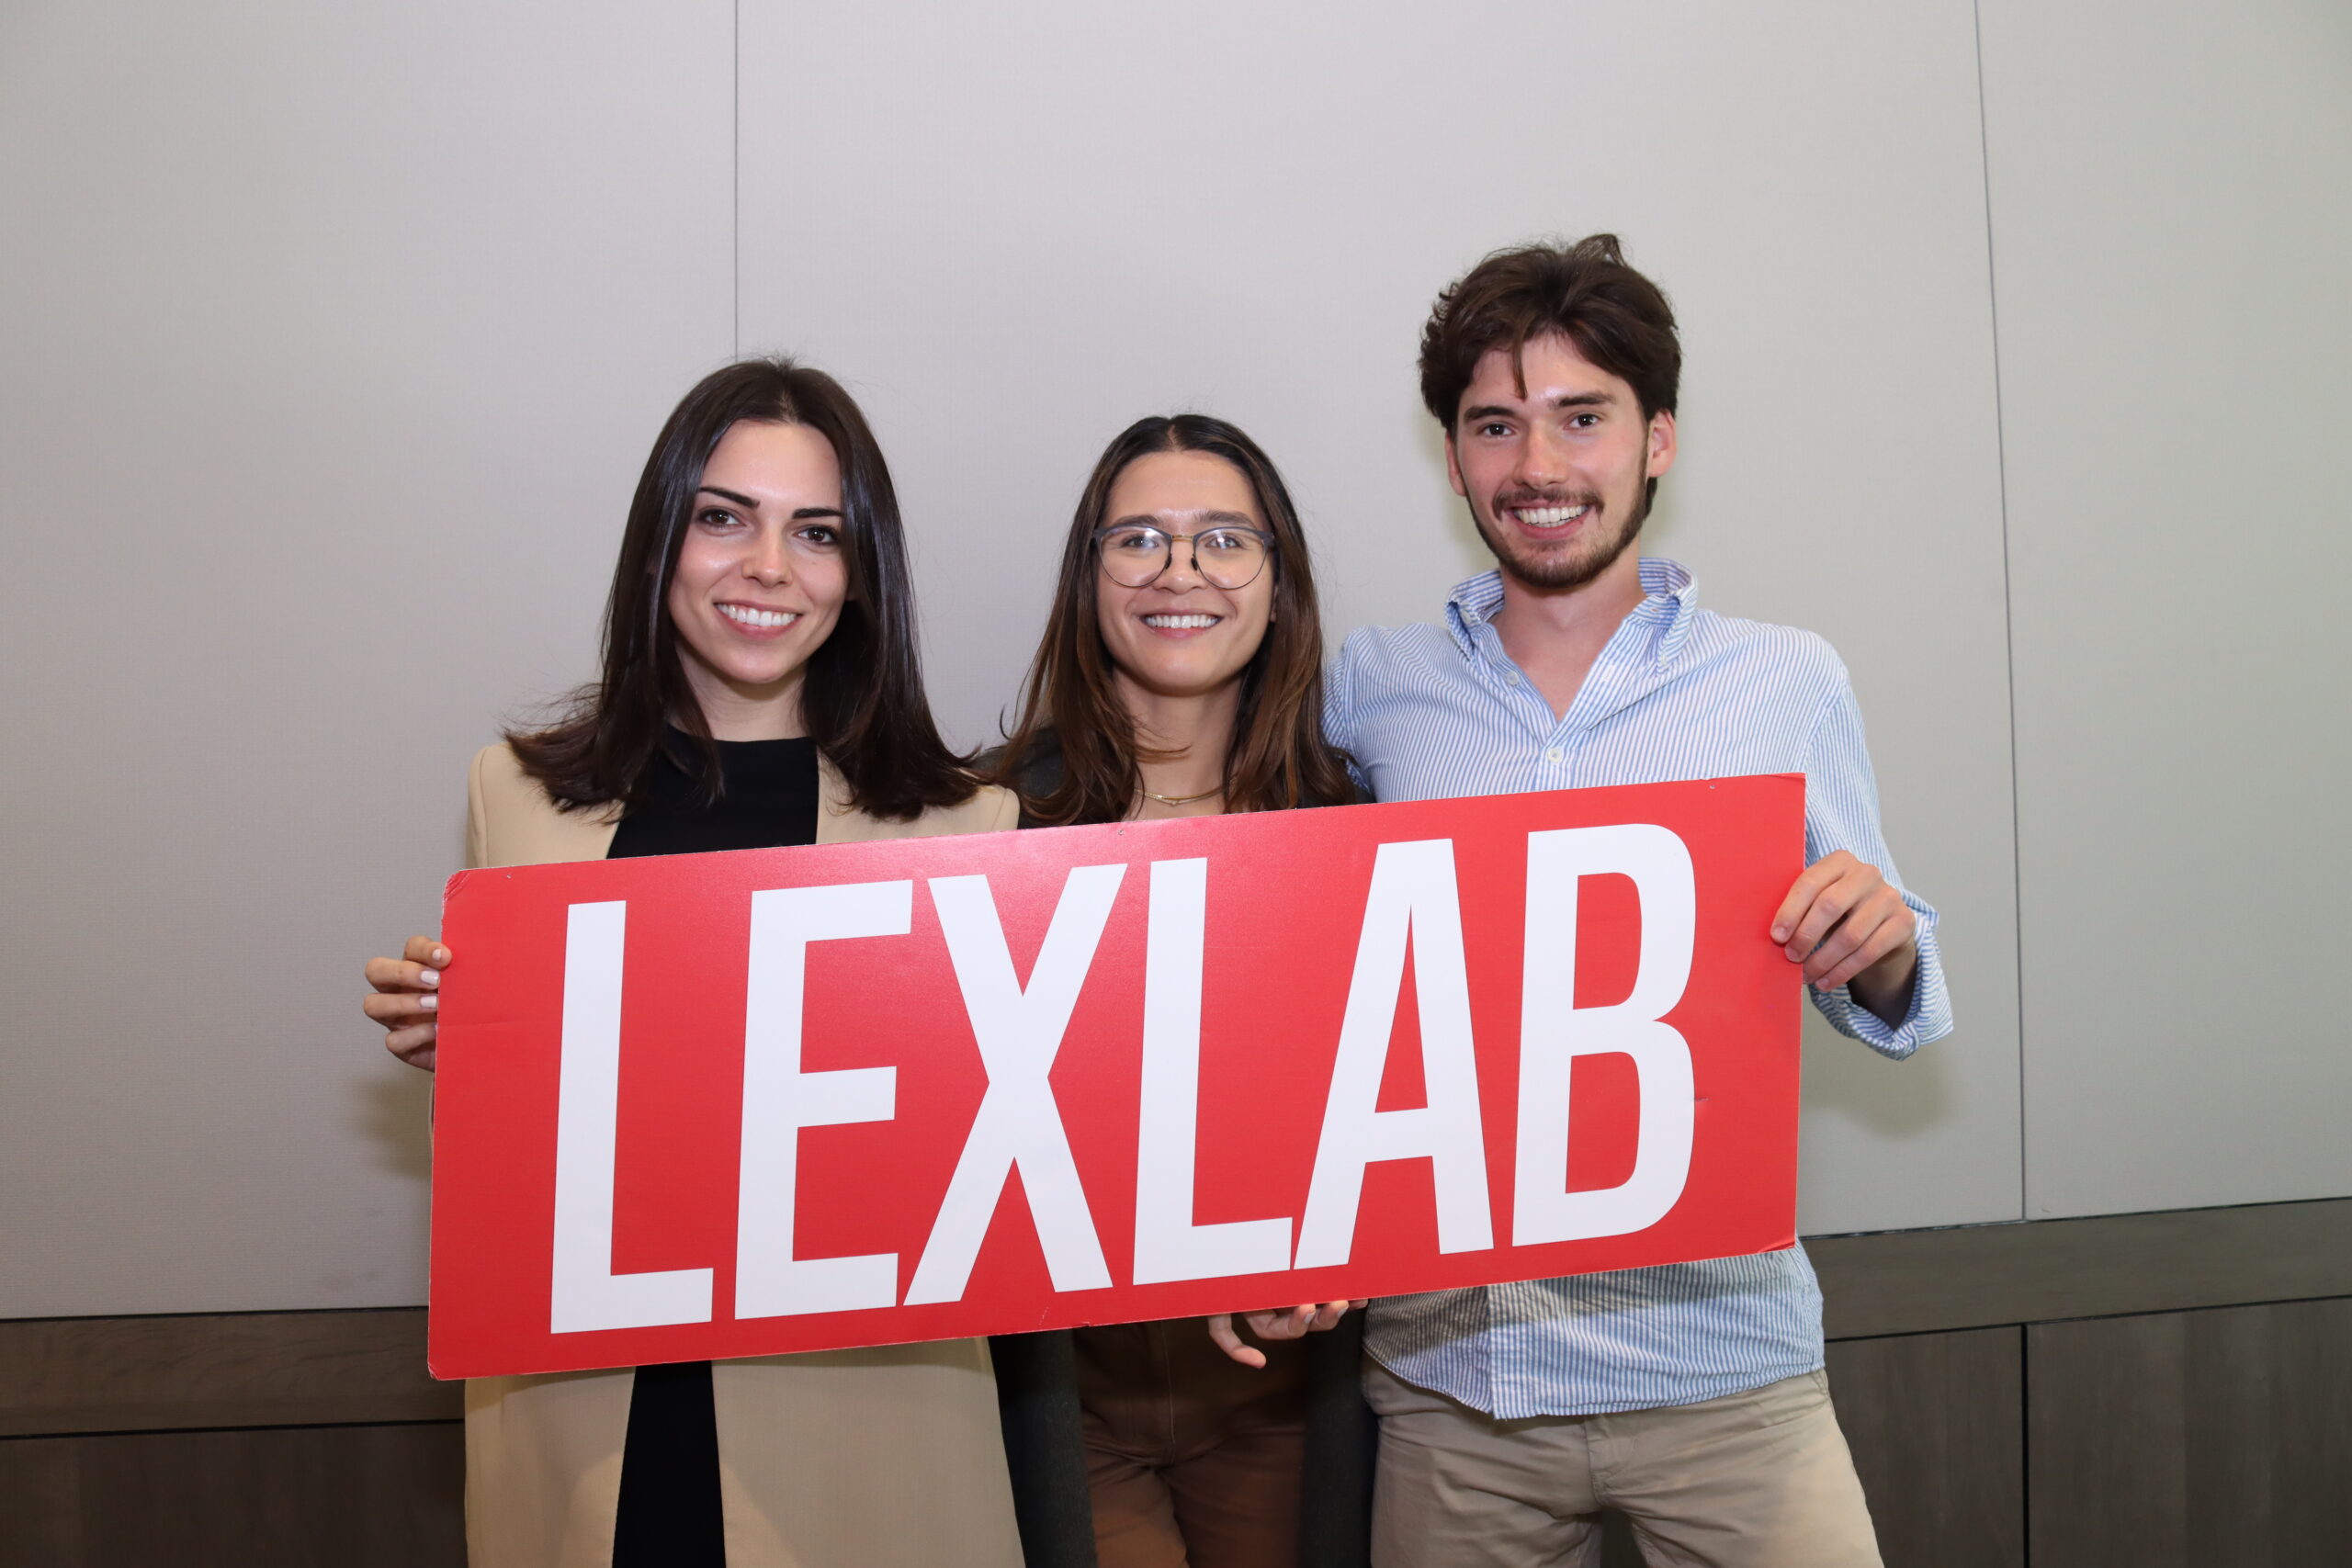 UC Hastings law students pose with LexLab sign